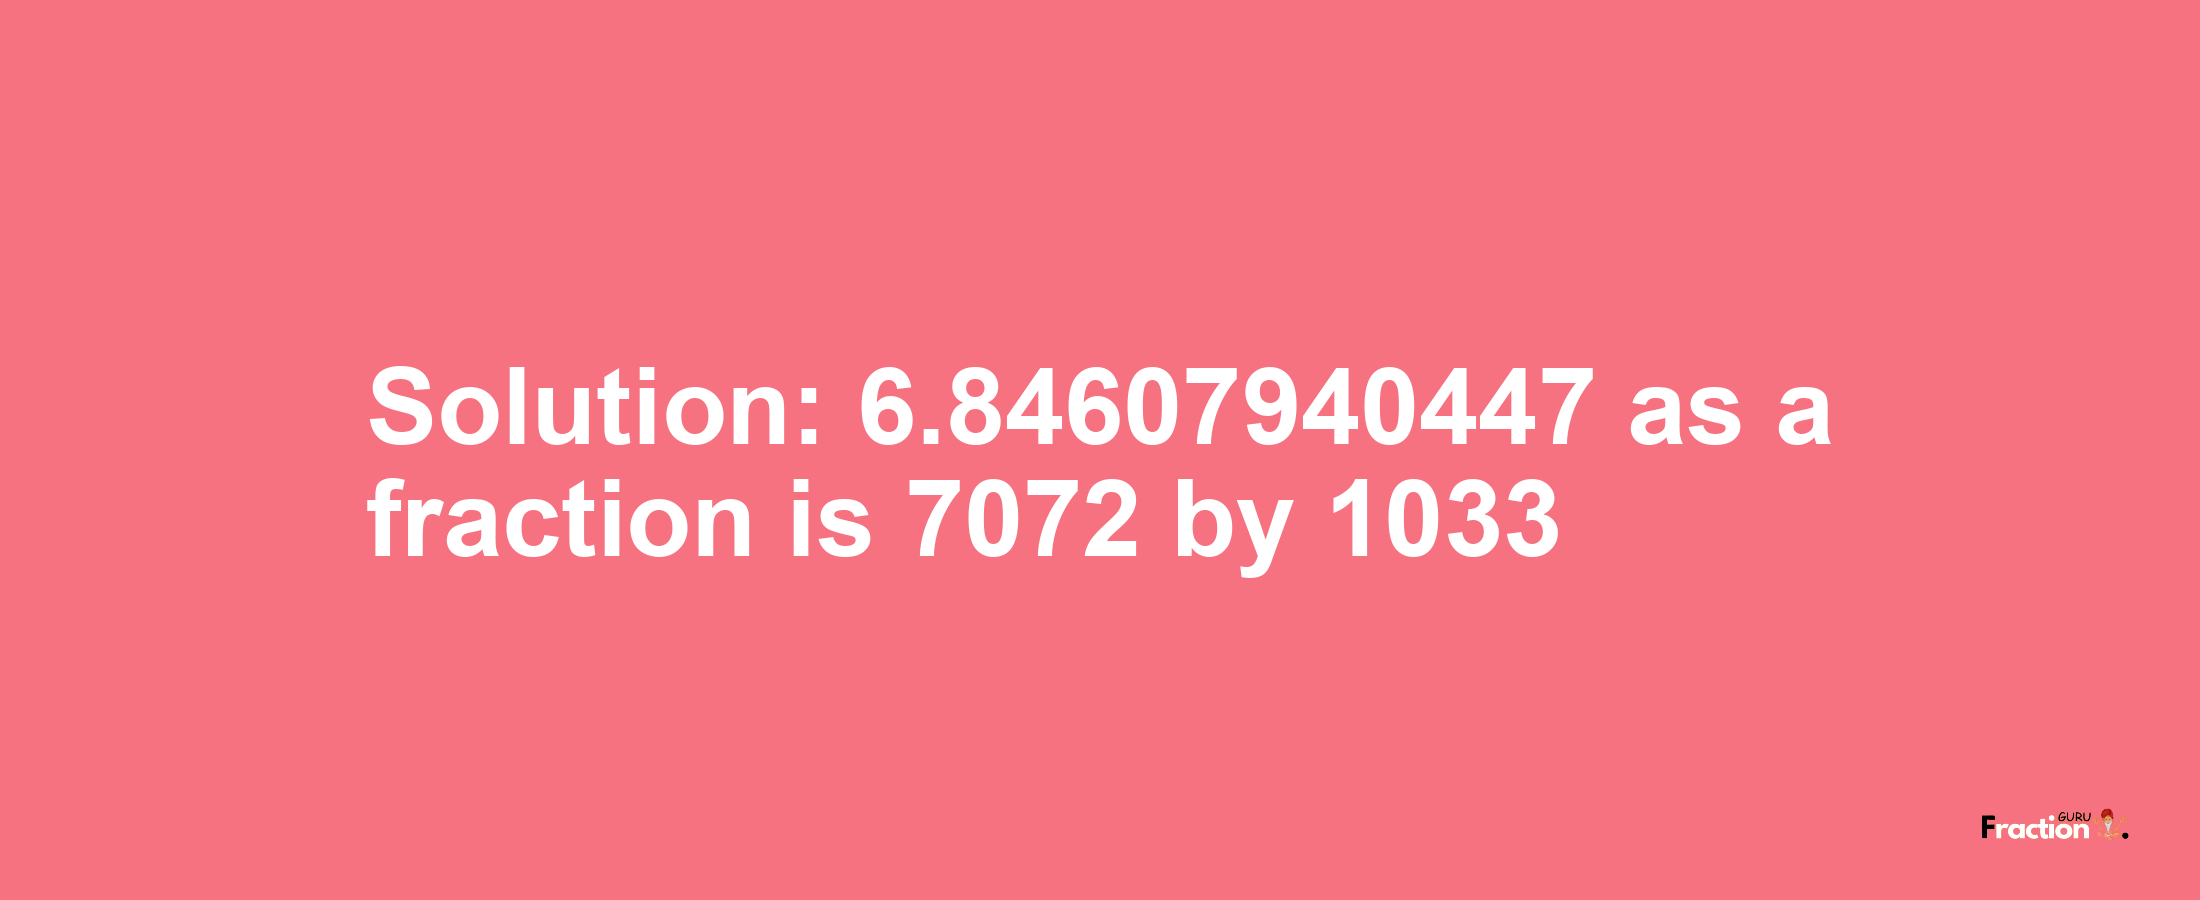 Solution:6.84607940447 as a fraction is 7072/1033